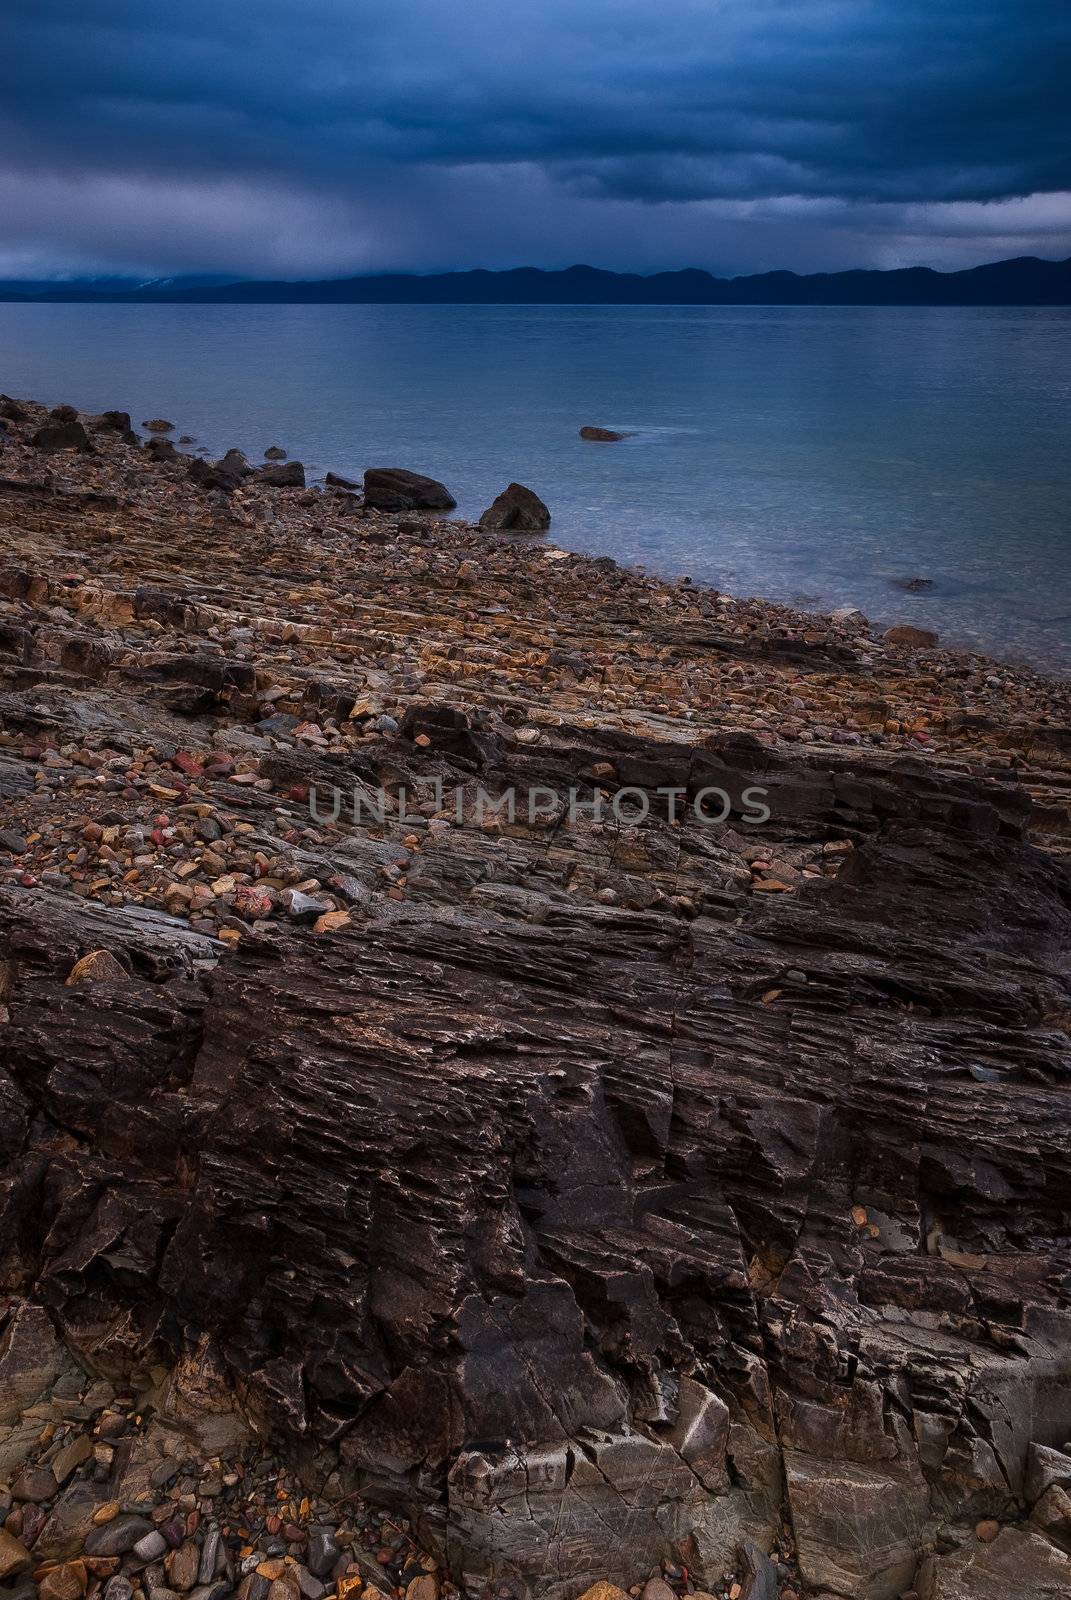 The rocky shore of Flathead Lake on a stormy evening in spring, West Shore State Park, Flathead County, Montana, USA by CharlesBolin